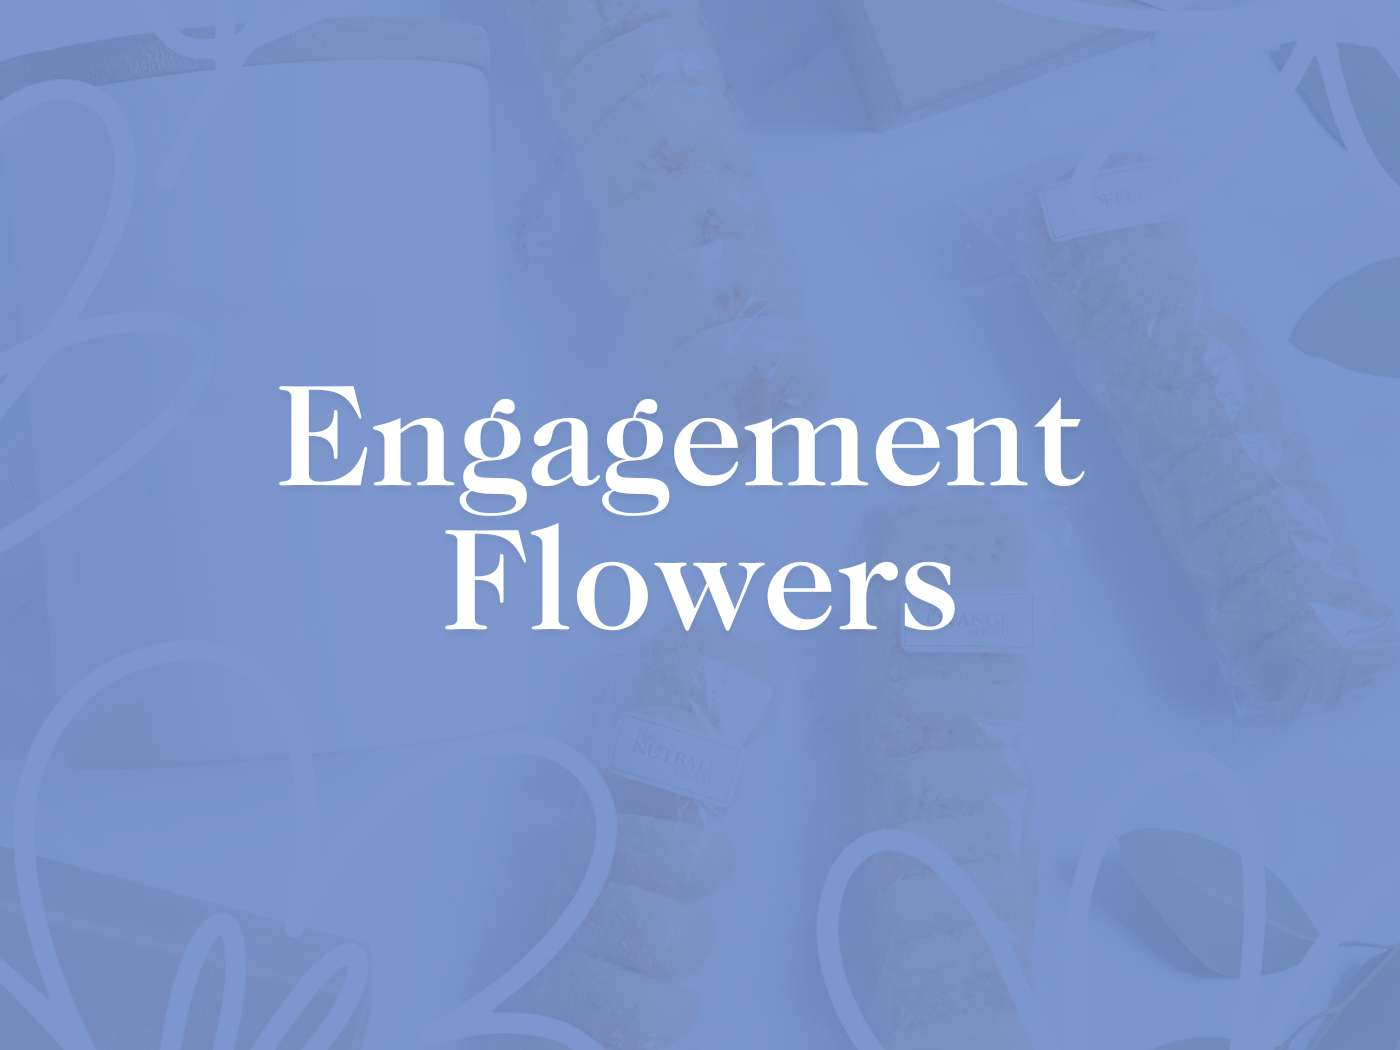 Elegant text 'Engagement Flowers' overlaying a soft blue background adorned with subtle floral designs, part of the Engagement Flowers Collection presented by Fabulous Flowers and Gifts.